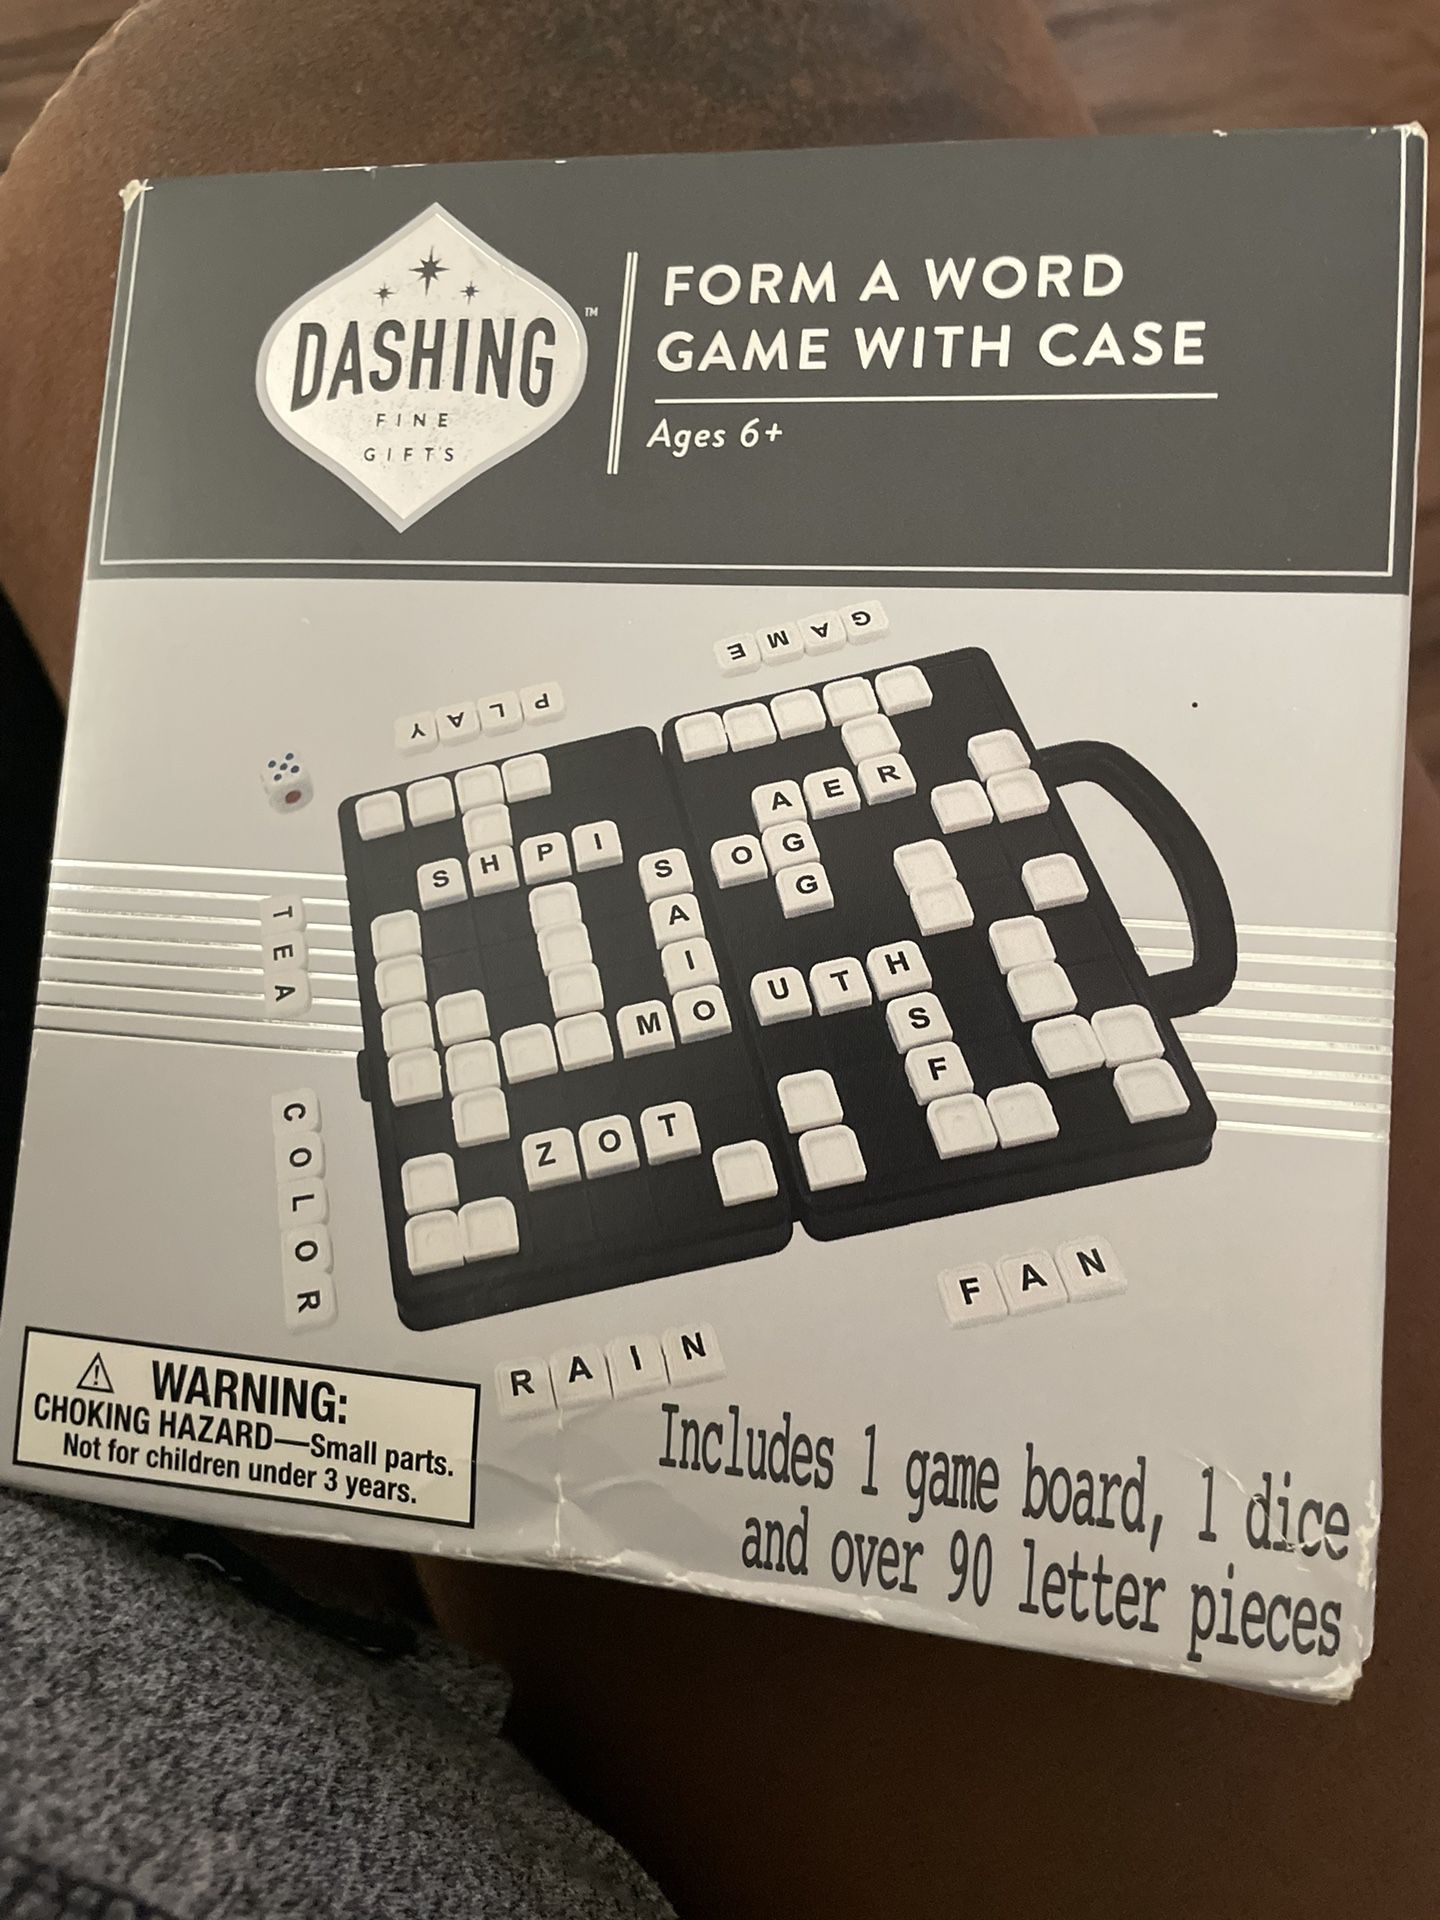 dashing fine gifts form a word game with case